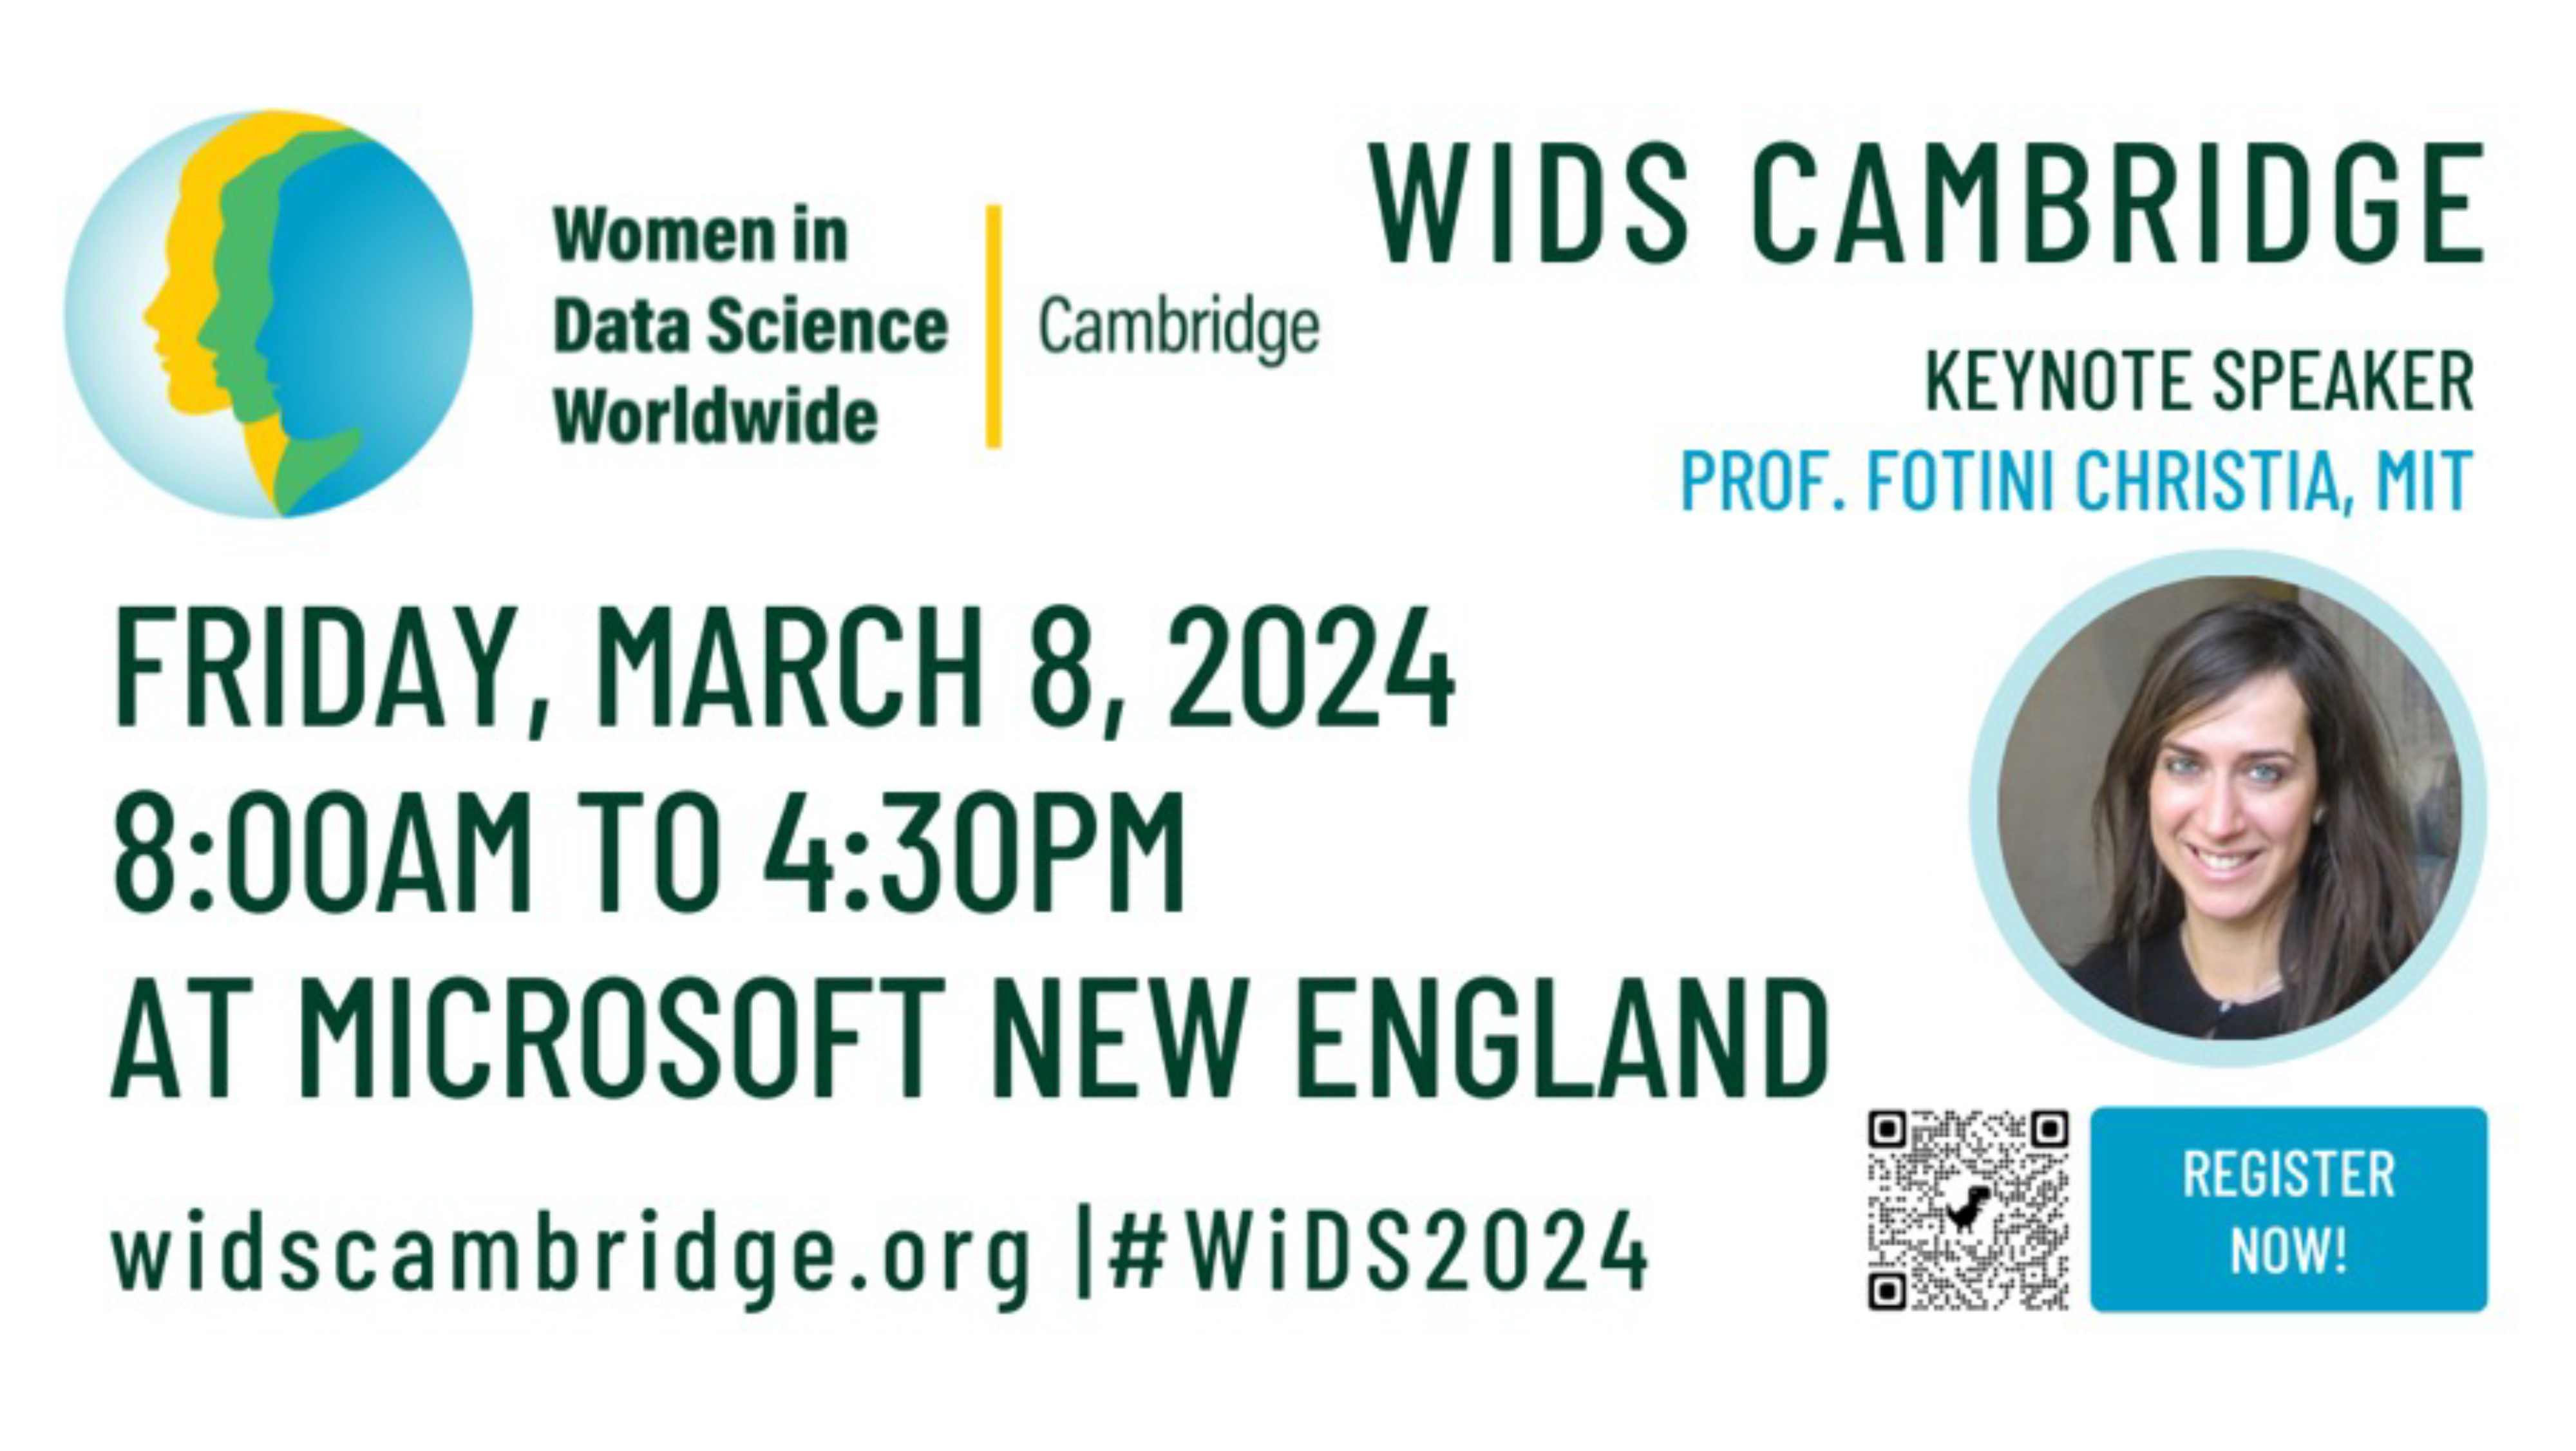 Women in Data Science (WiDS) Cambridge conference flyer